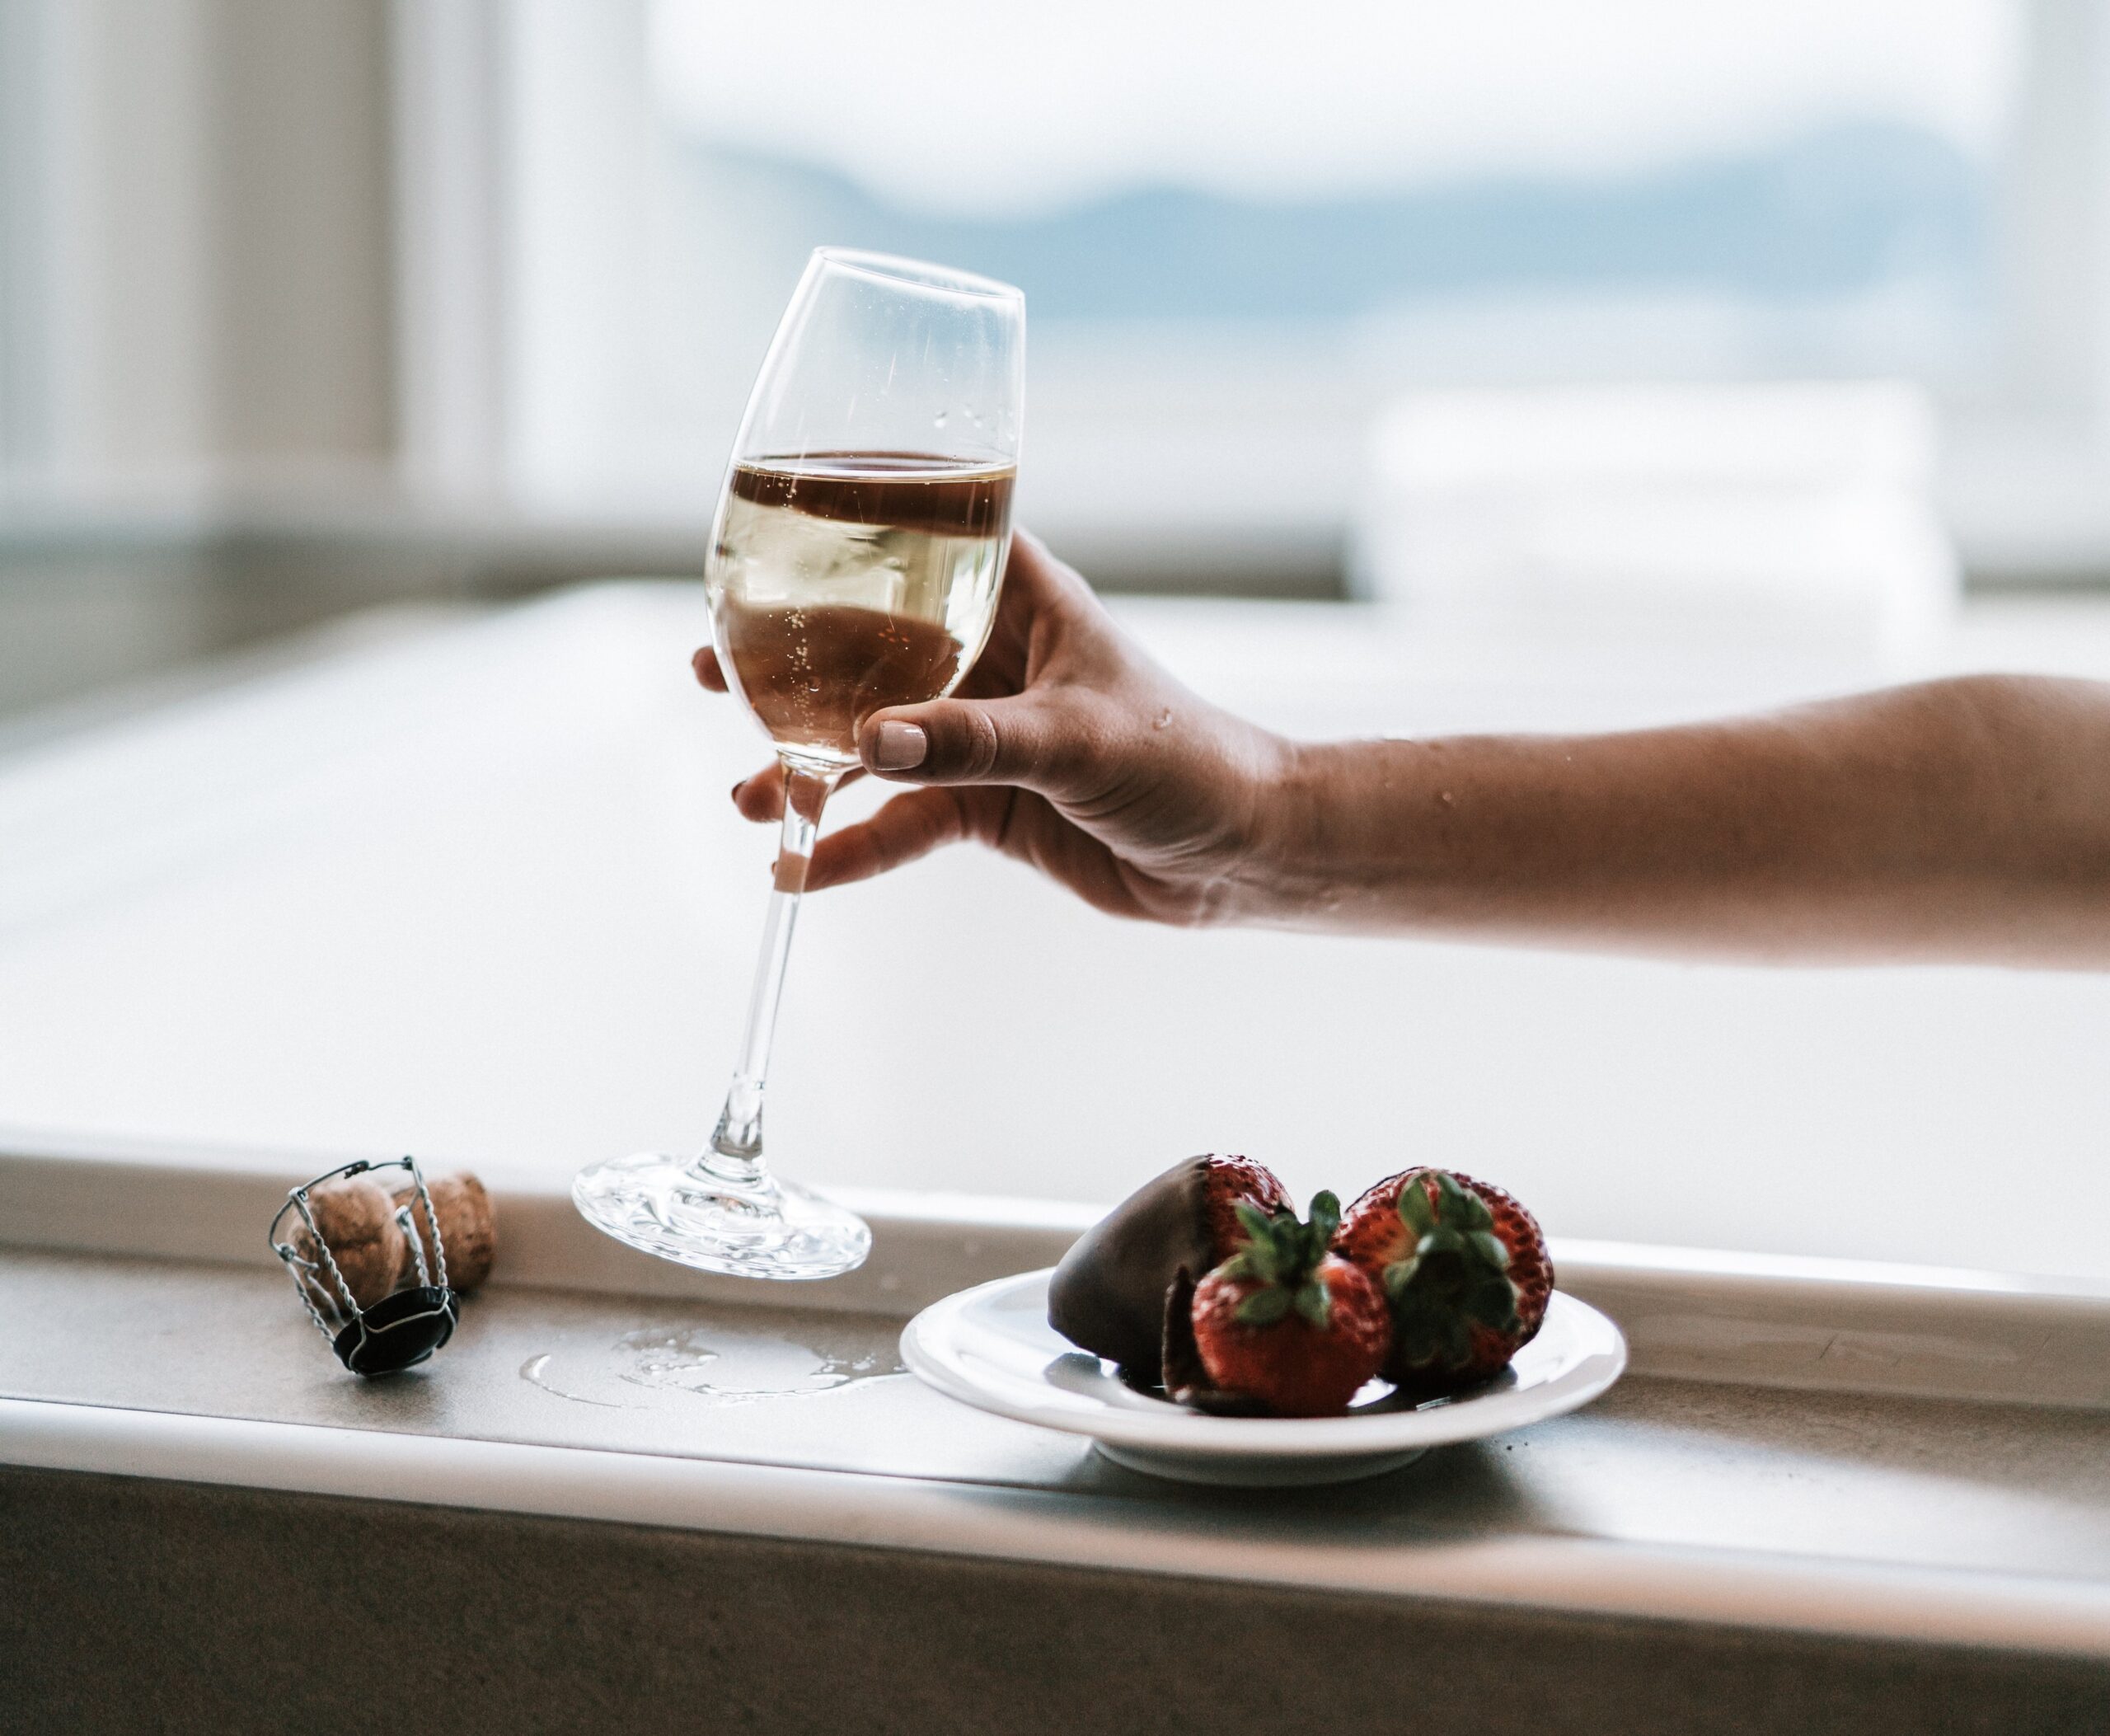 Hand holding wine glass with strawberries on plate